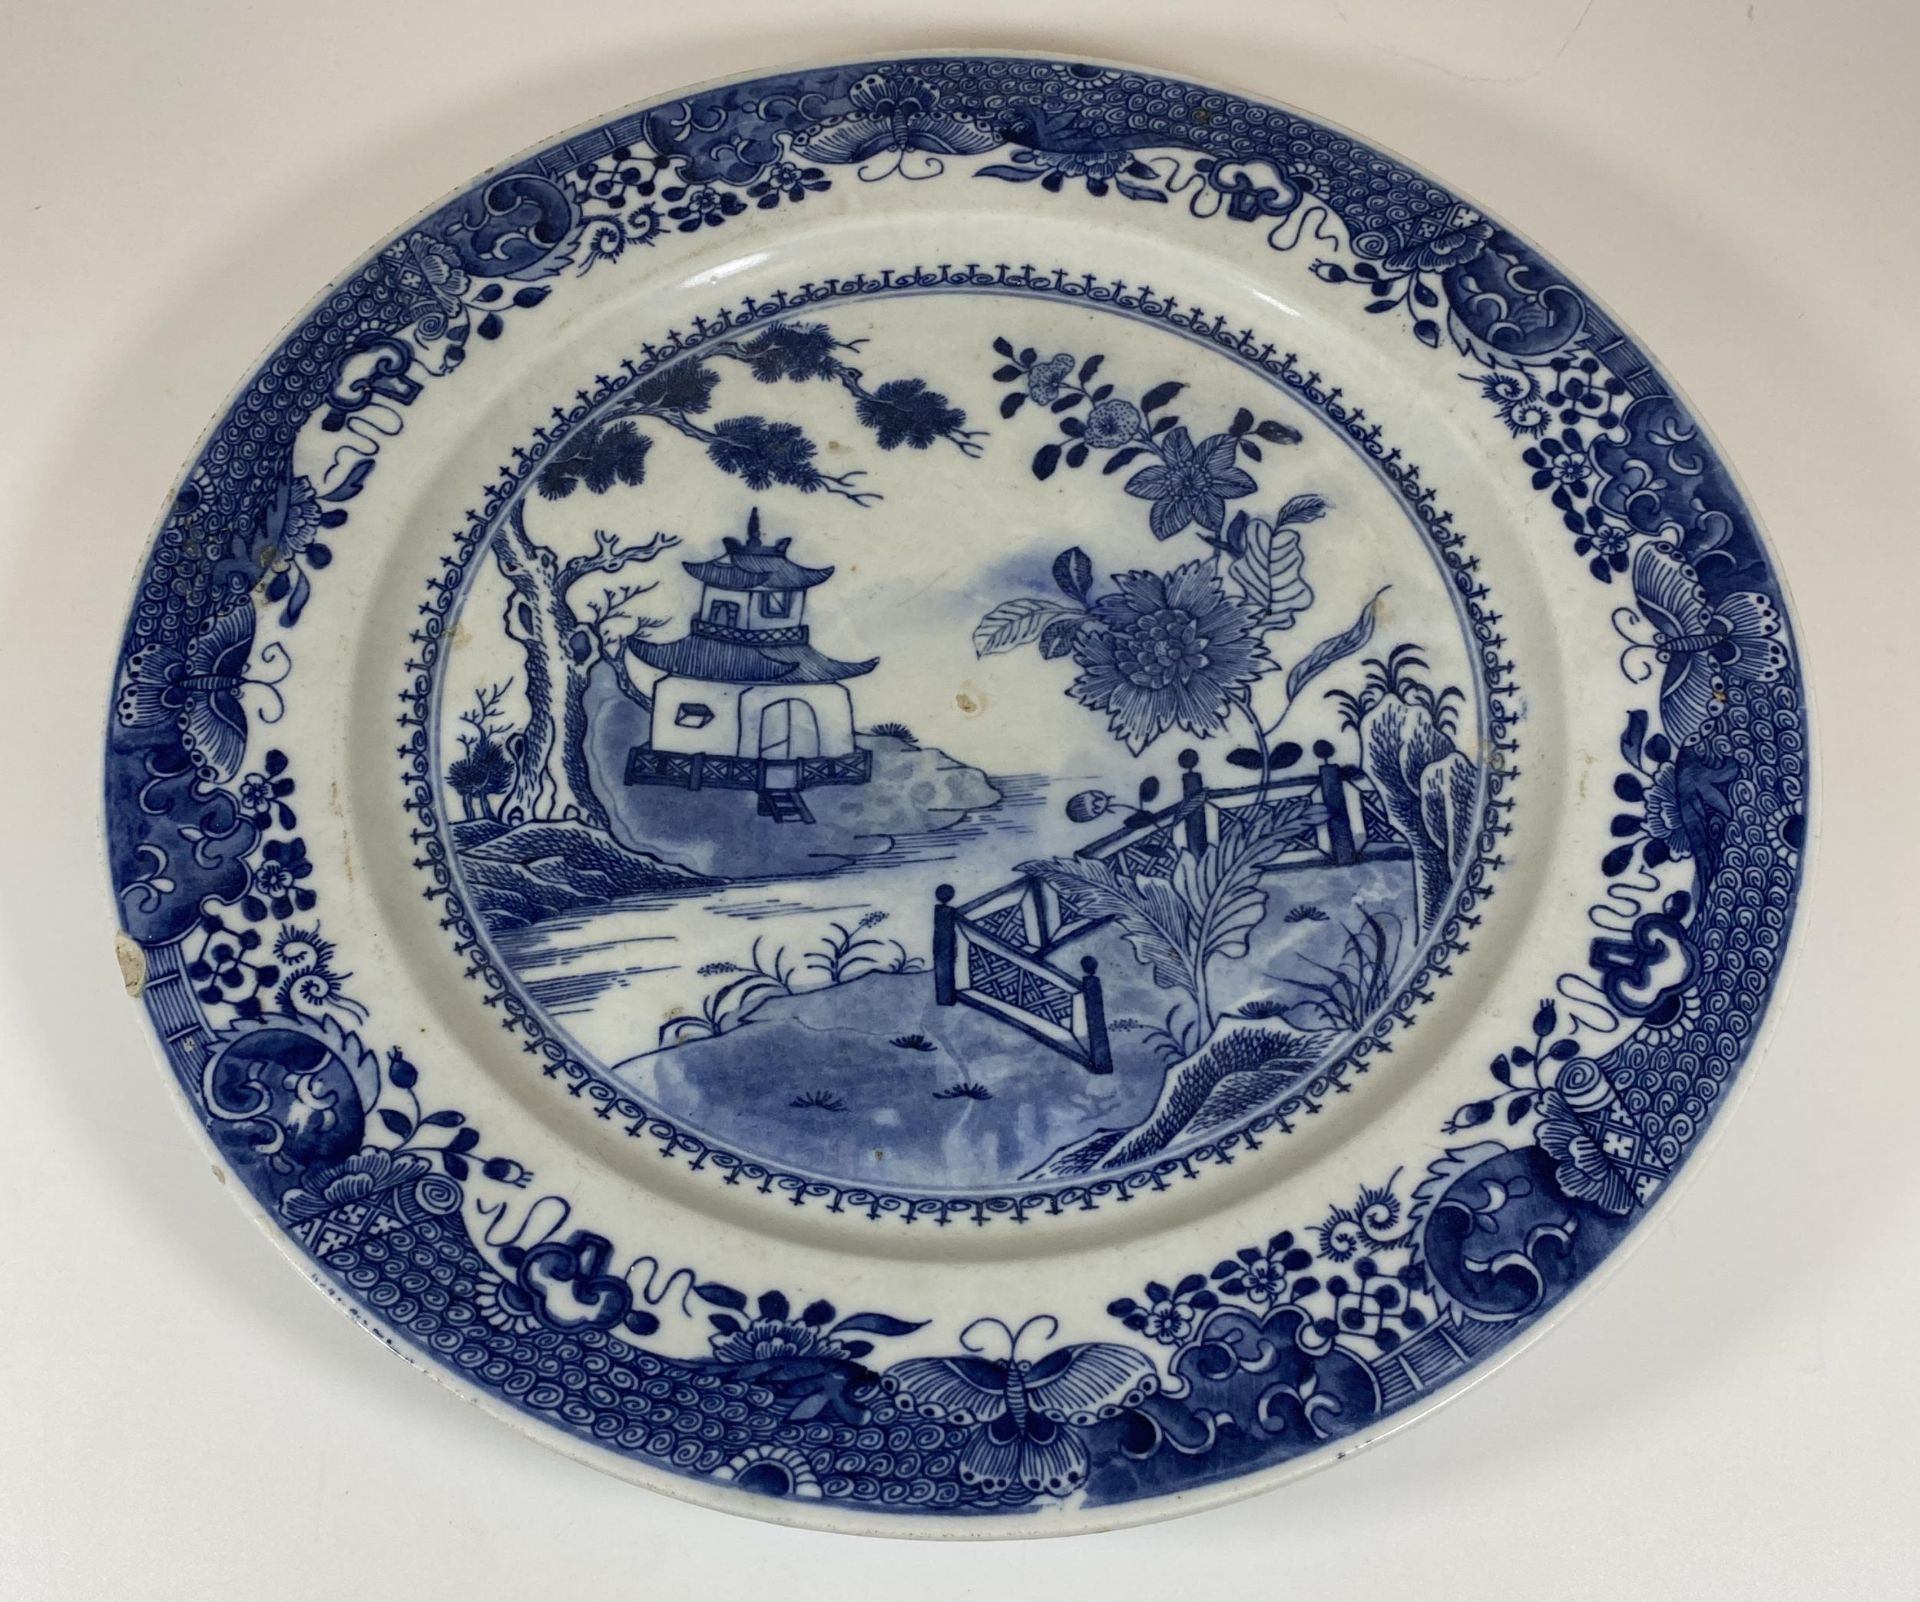 A LARGE CHINESE BLUE AND WHITE CHARGER WITH PAGODA LANDSCAPE DESIGN, DIAMETER 35CM